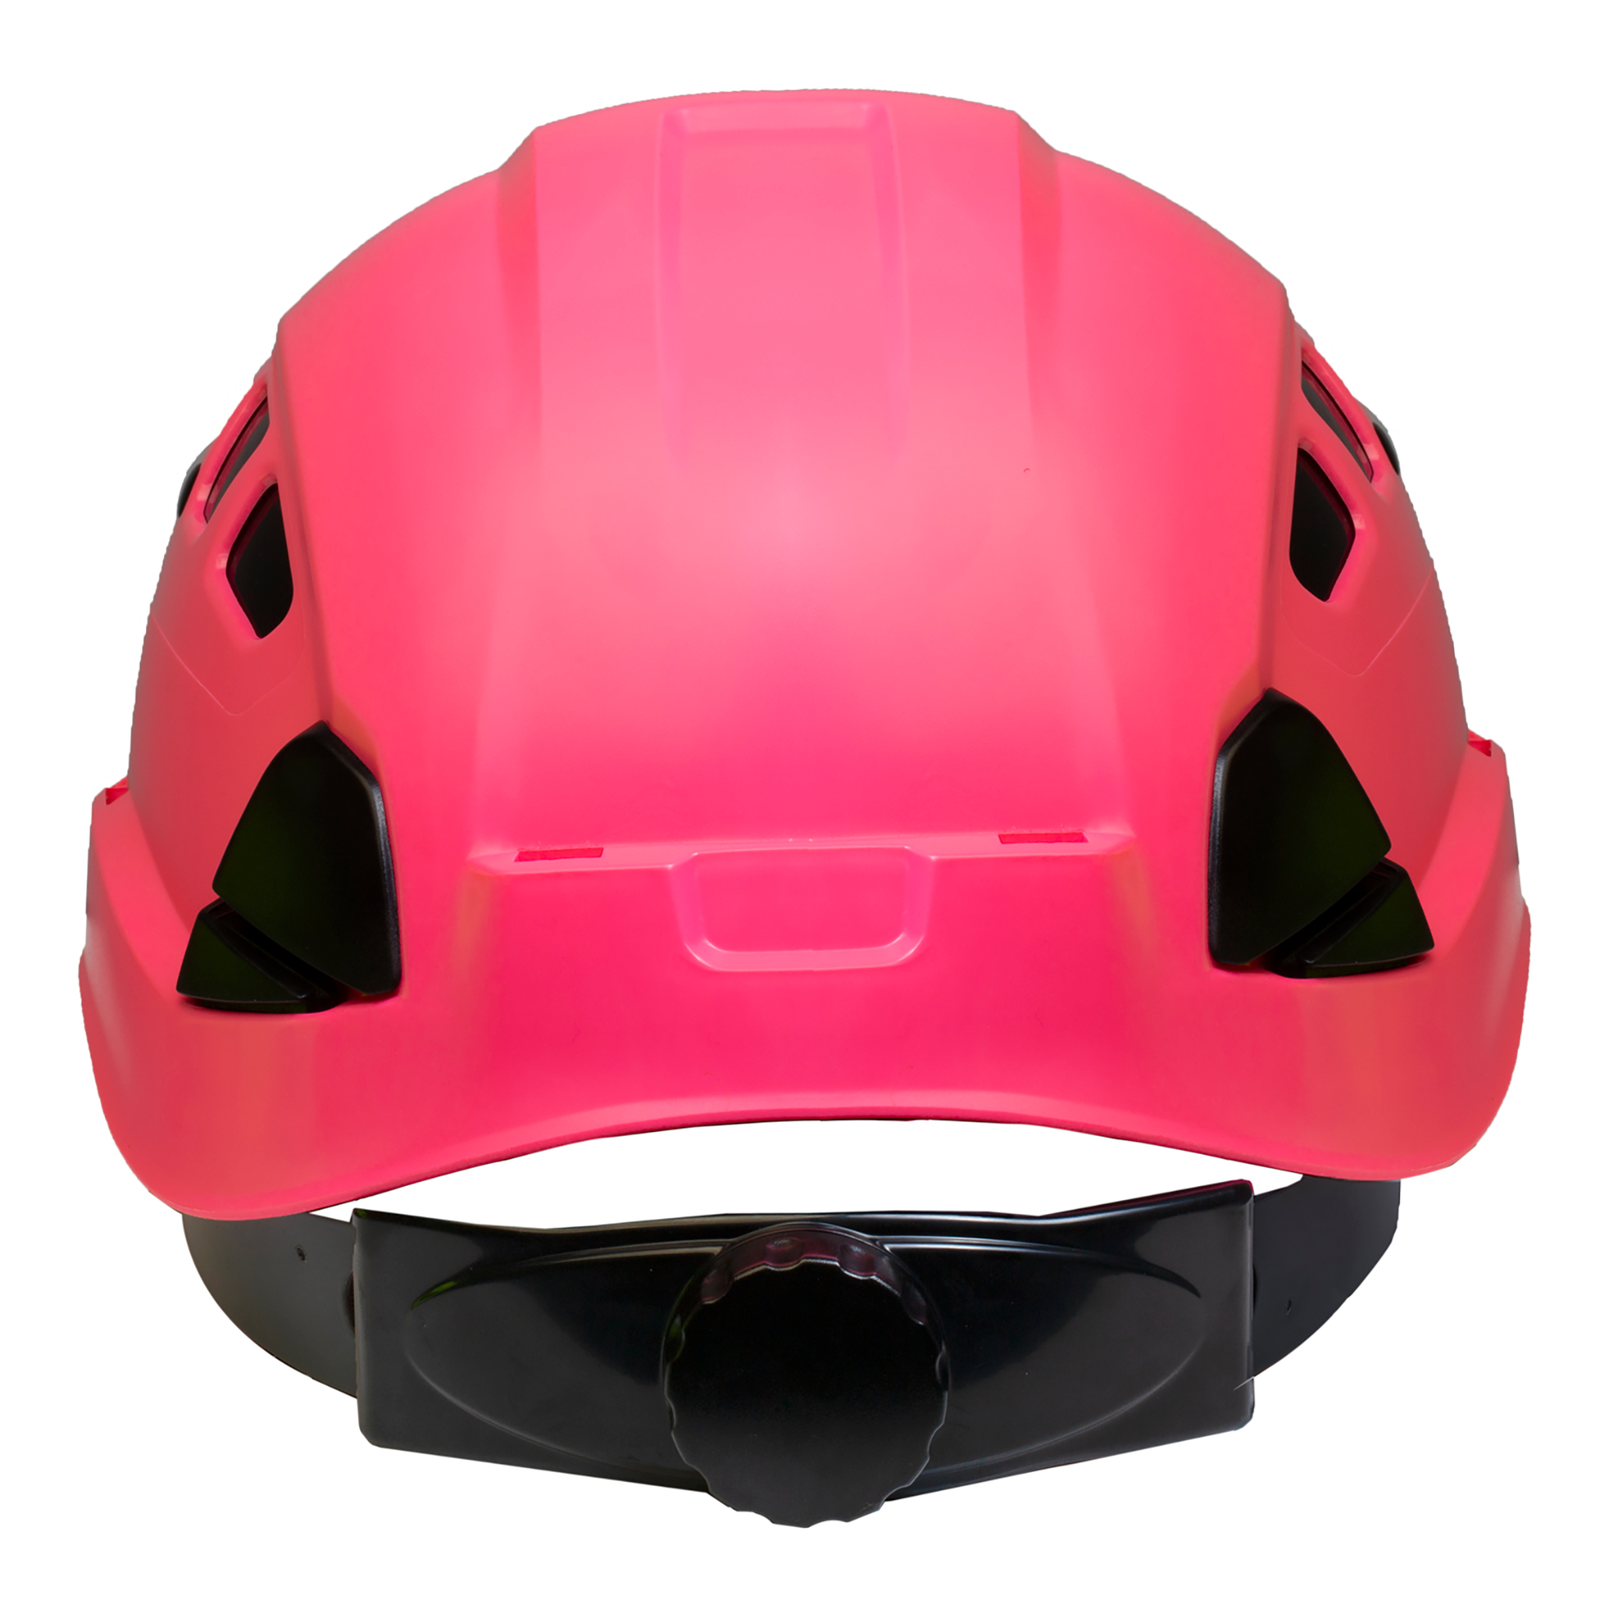 The Jorestech pick ventilated hard hat with adjustable 6 point suspension. It shows the black ratchet system and clamps for head light